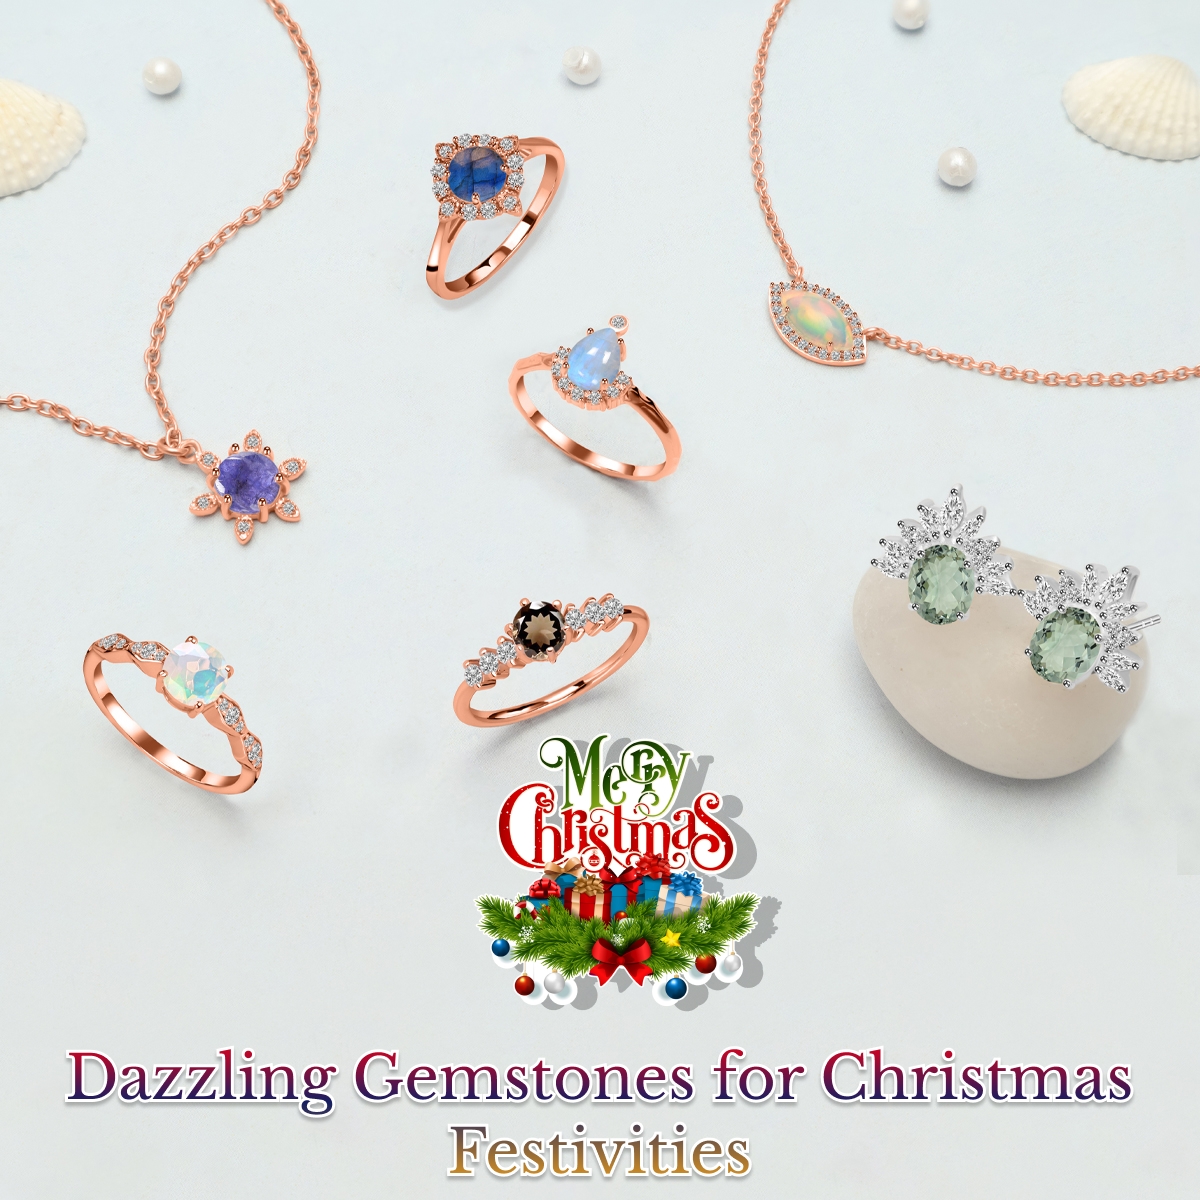 Gemstone Jewelry To Wear For Christmas Party